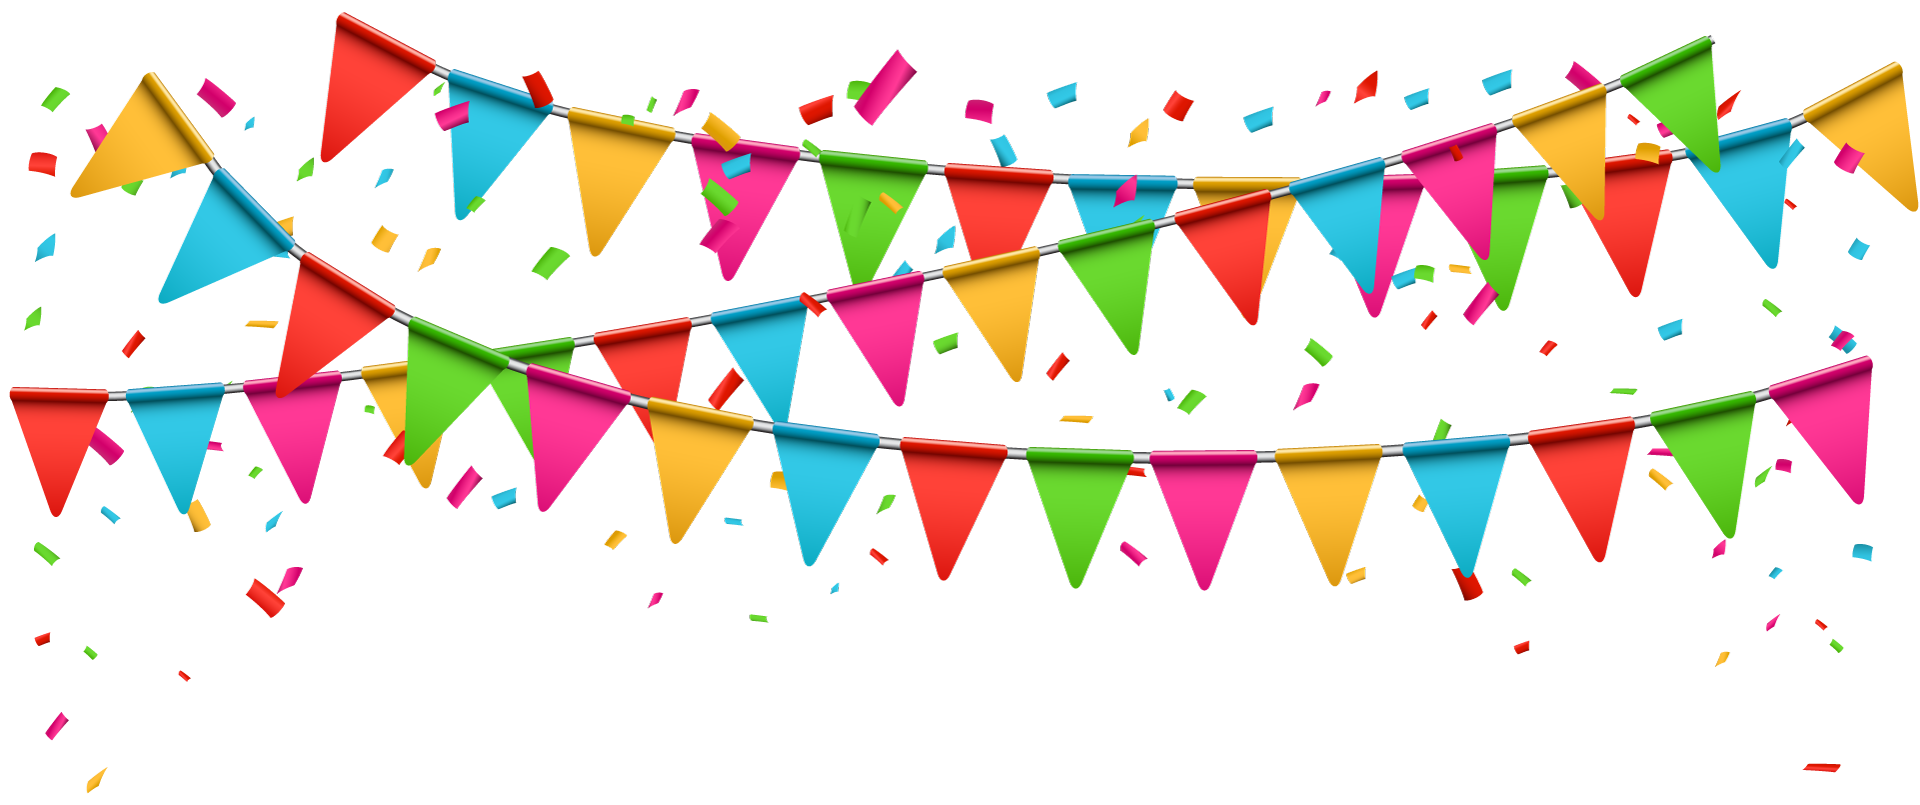 Free Download Birthday Party Images Png Transparent Background Free Download 45894 Freeiconspng